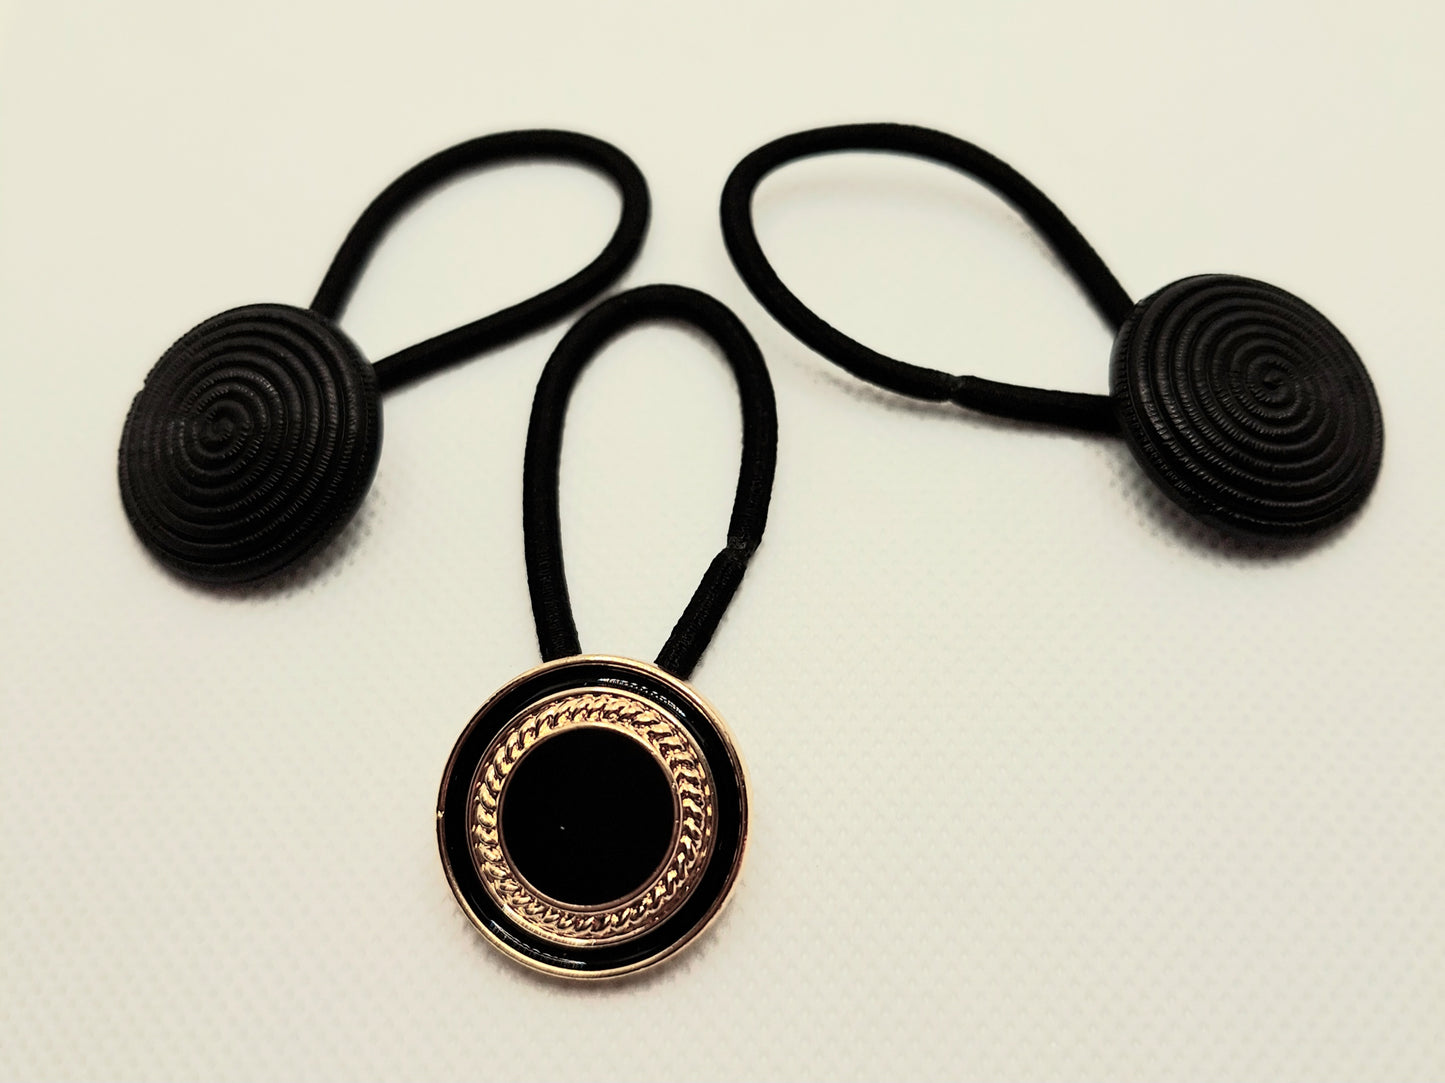 Black and Gold 3pc Button Hair Ties Girls Hair Accessories Hair Ponytail Holder